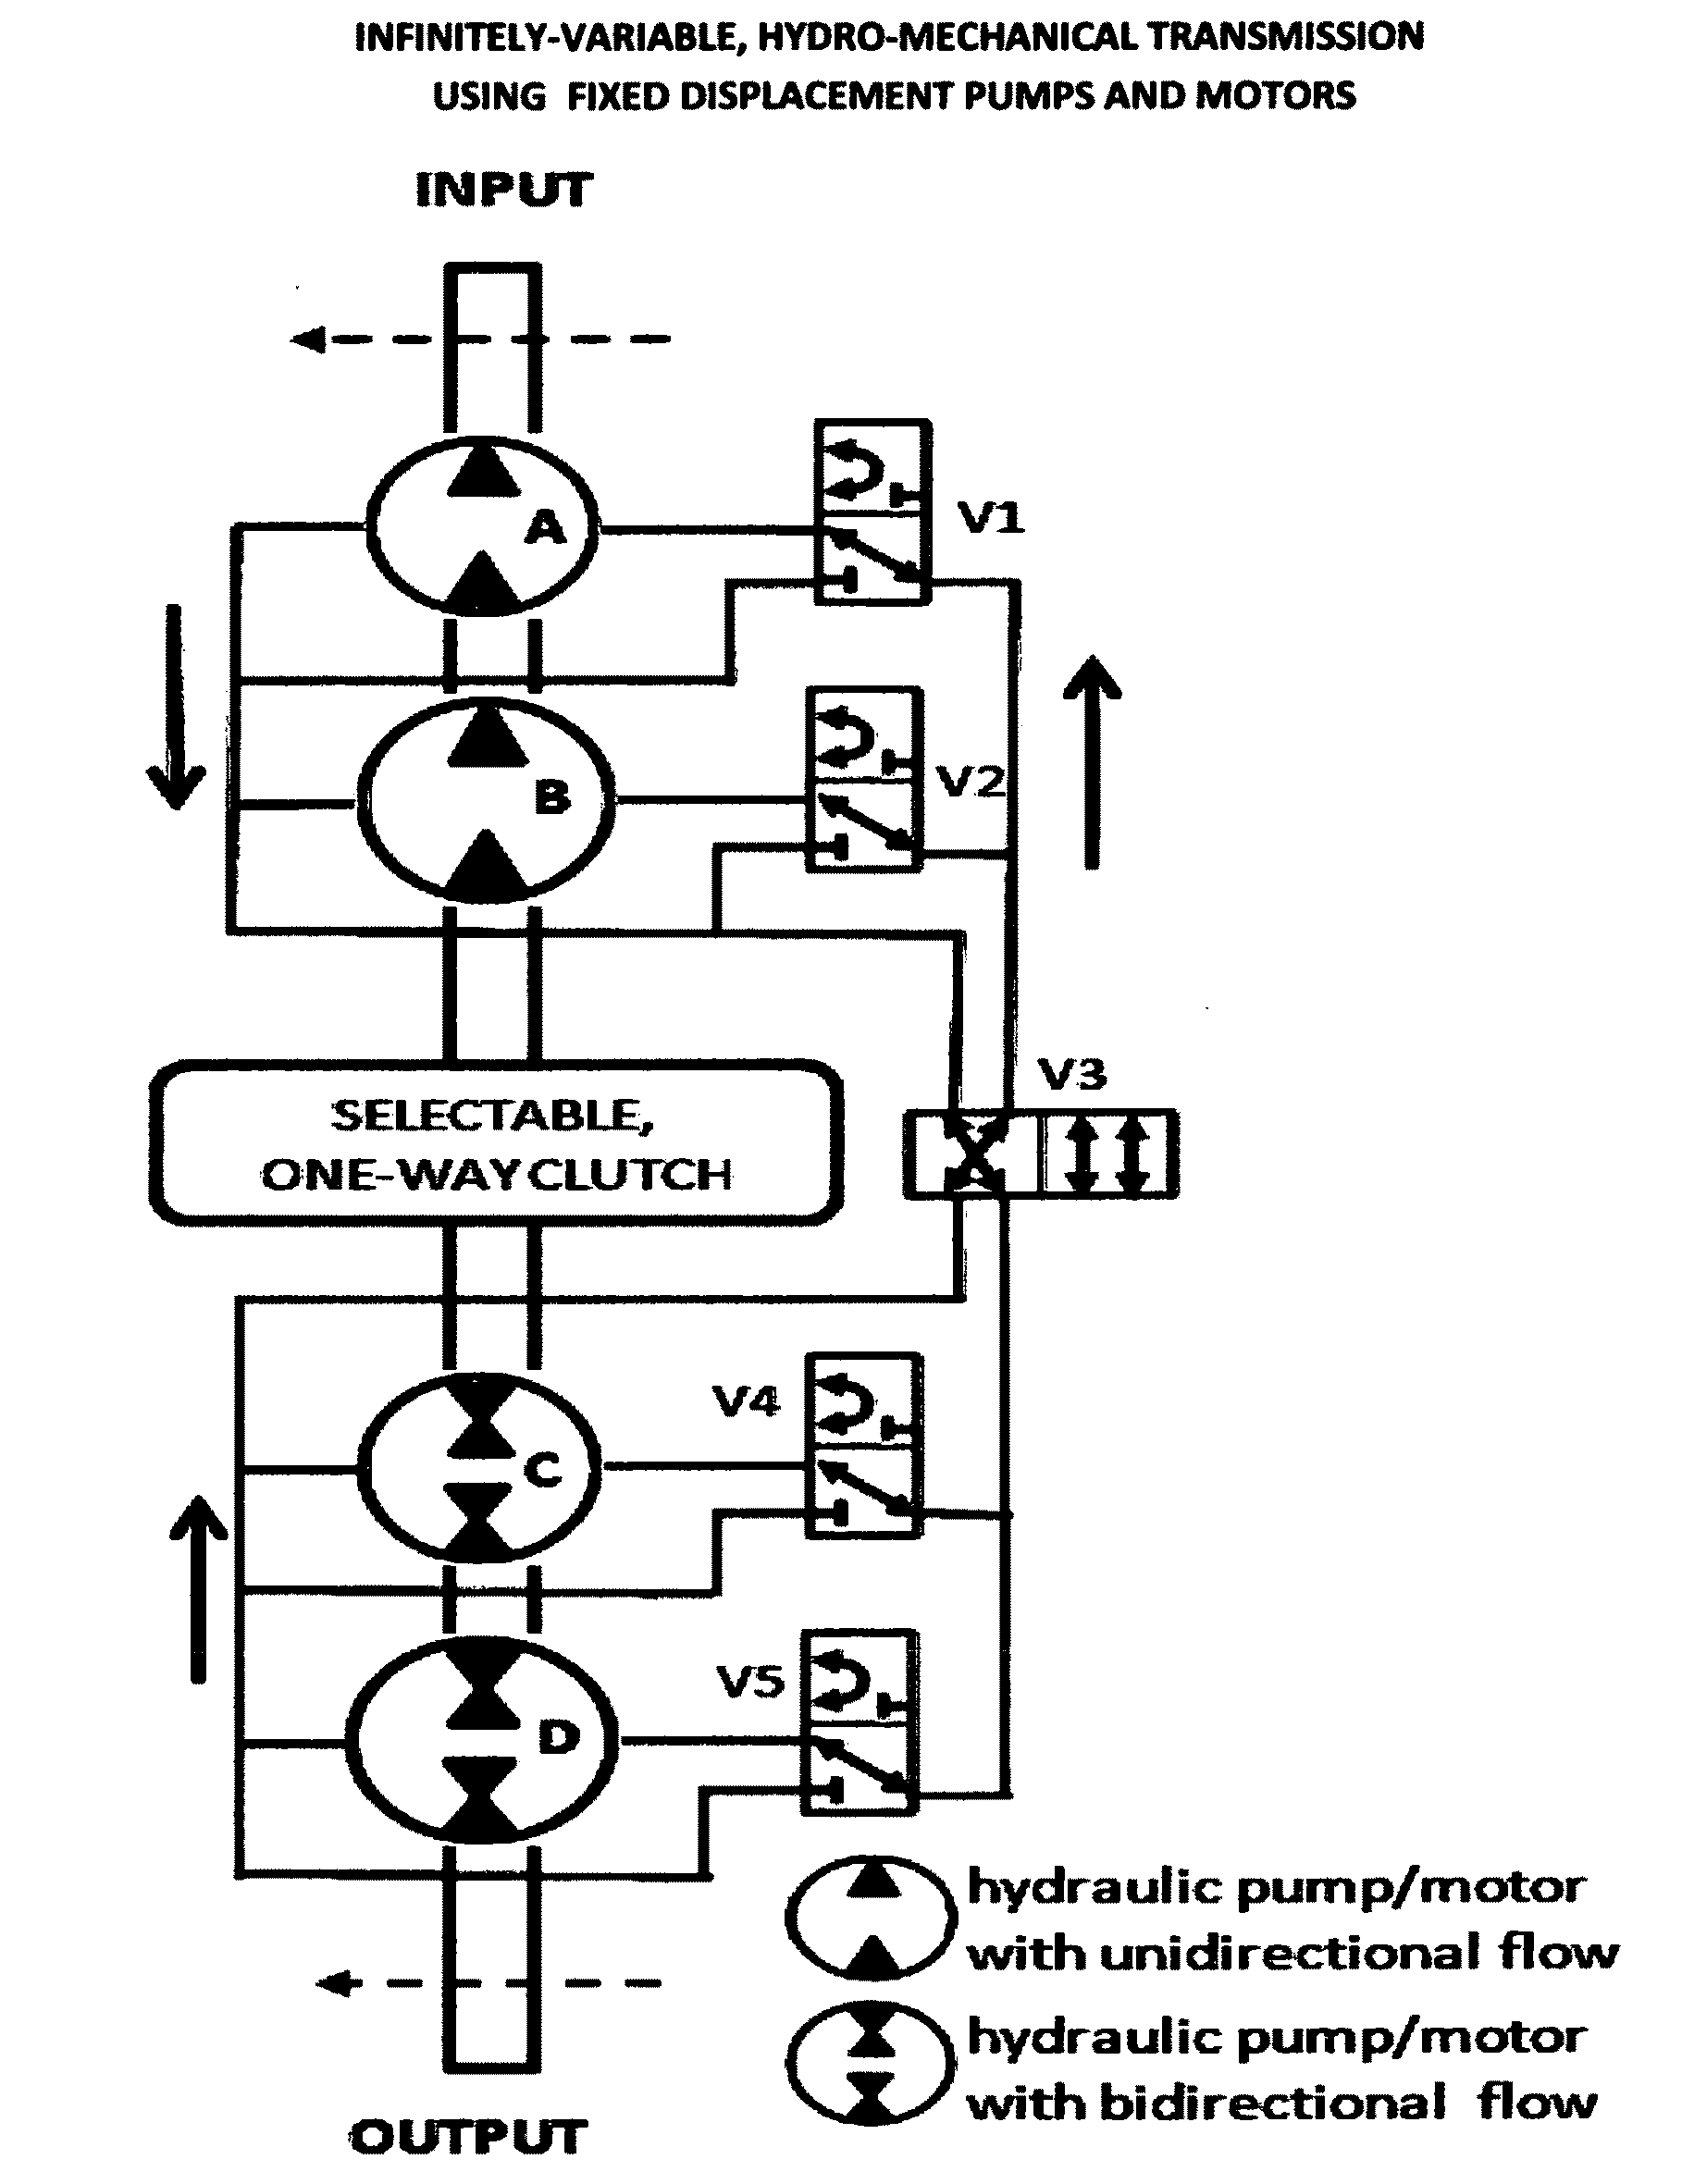 Infinitely-variable, hydro-mechanical transmission using fixed displacement pumps and motors